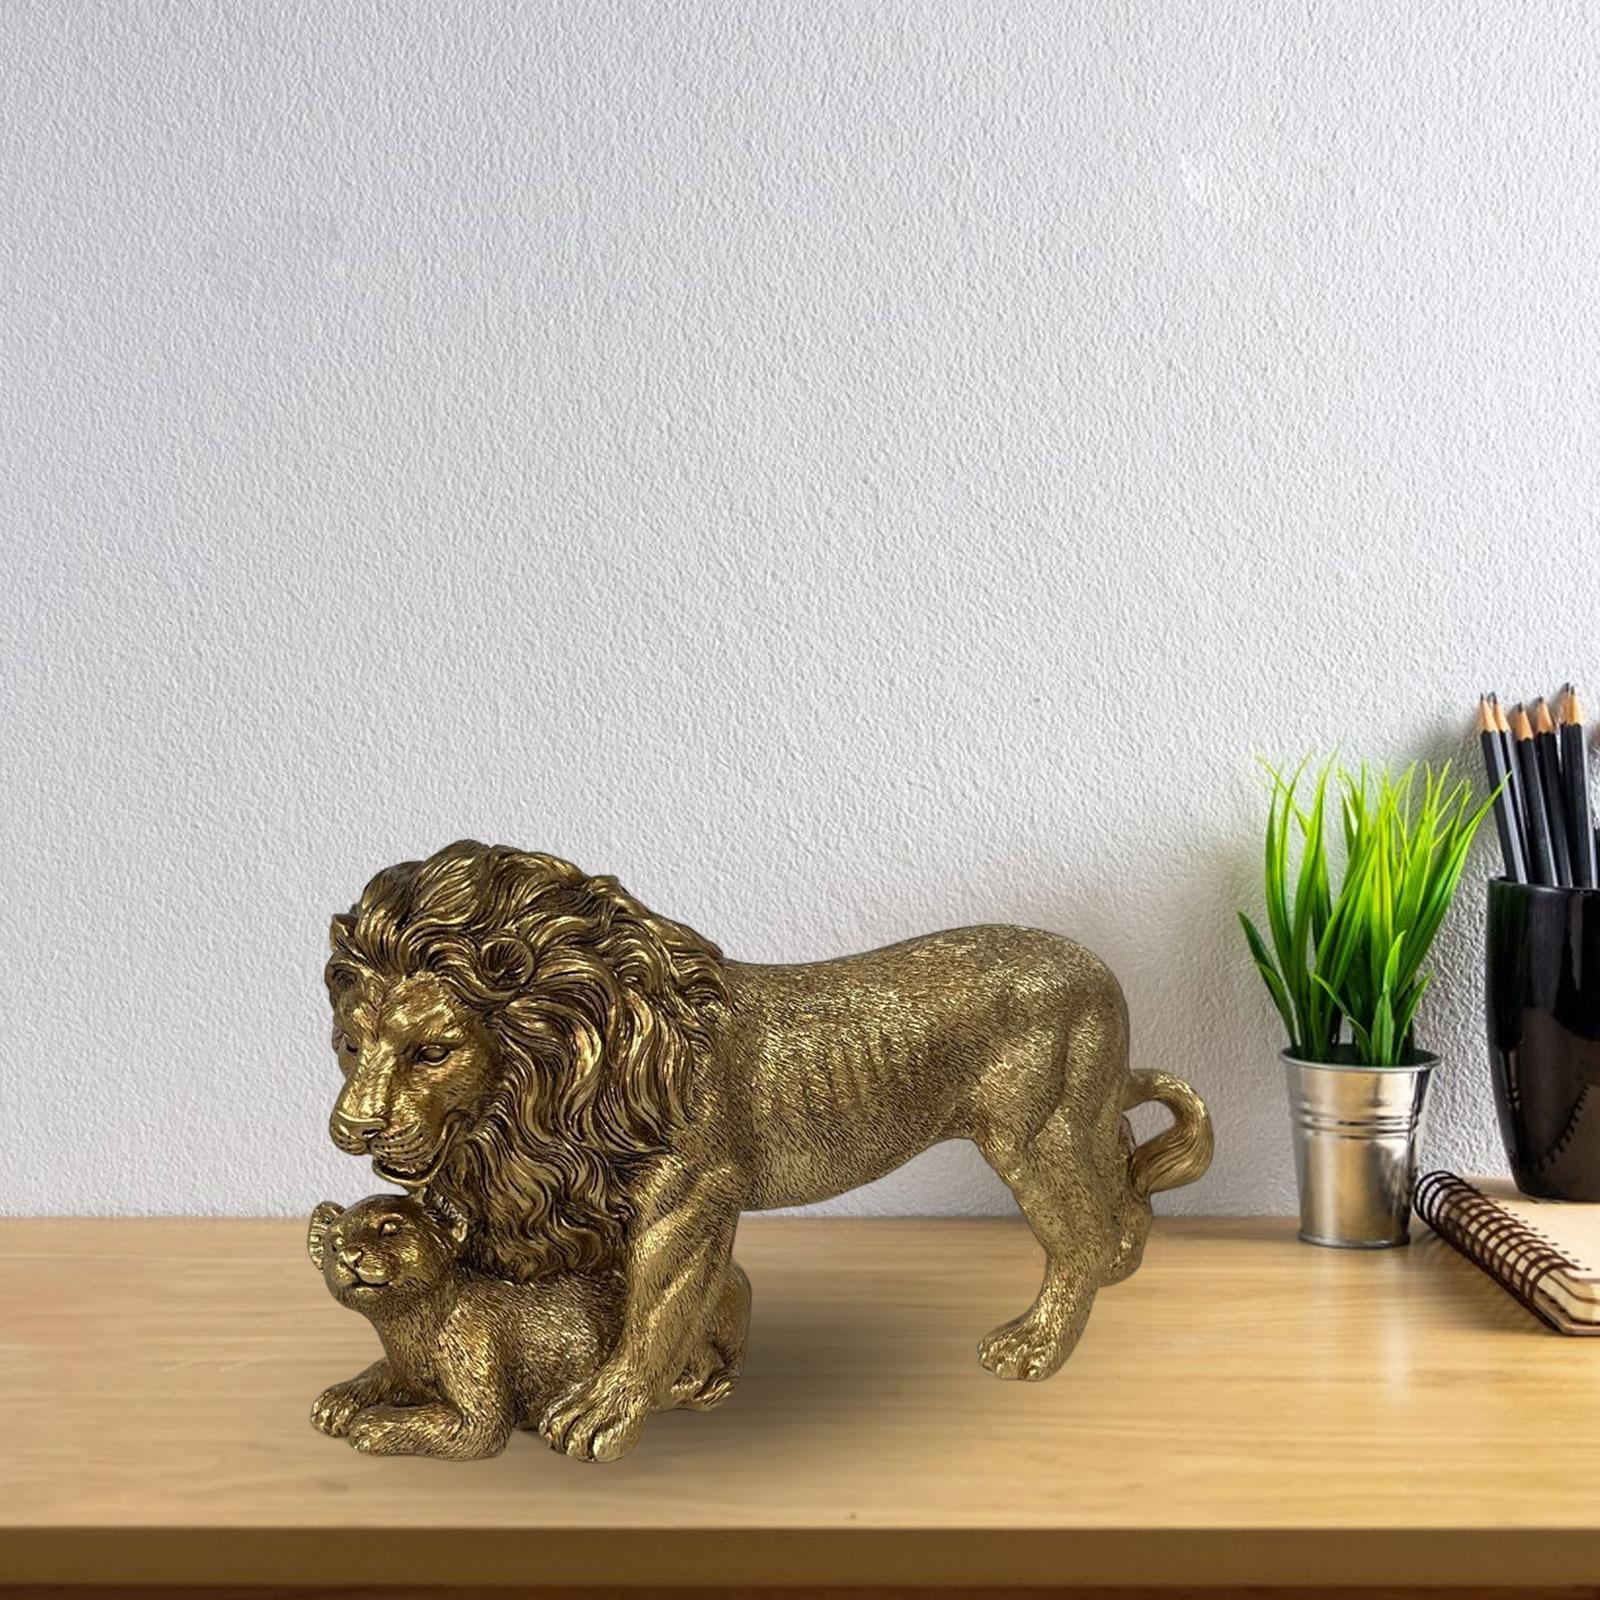 Lion King Statue Animal Figurine Ornament for Office Living Room Accessories